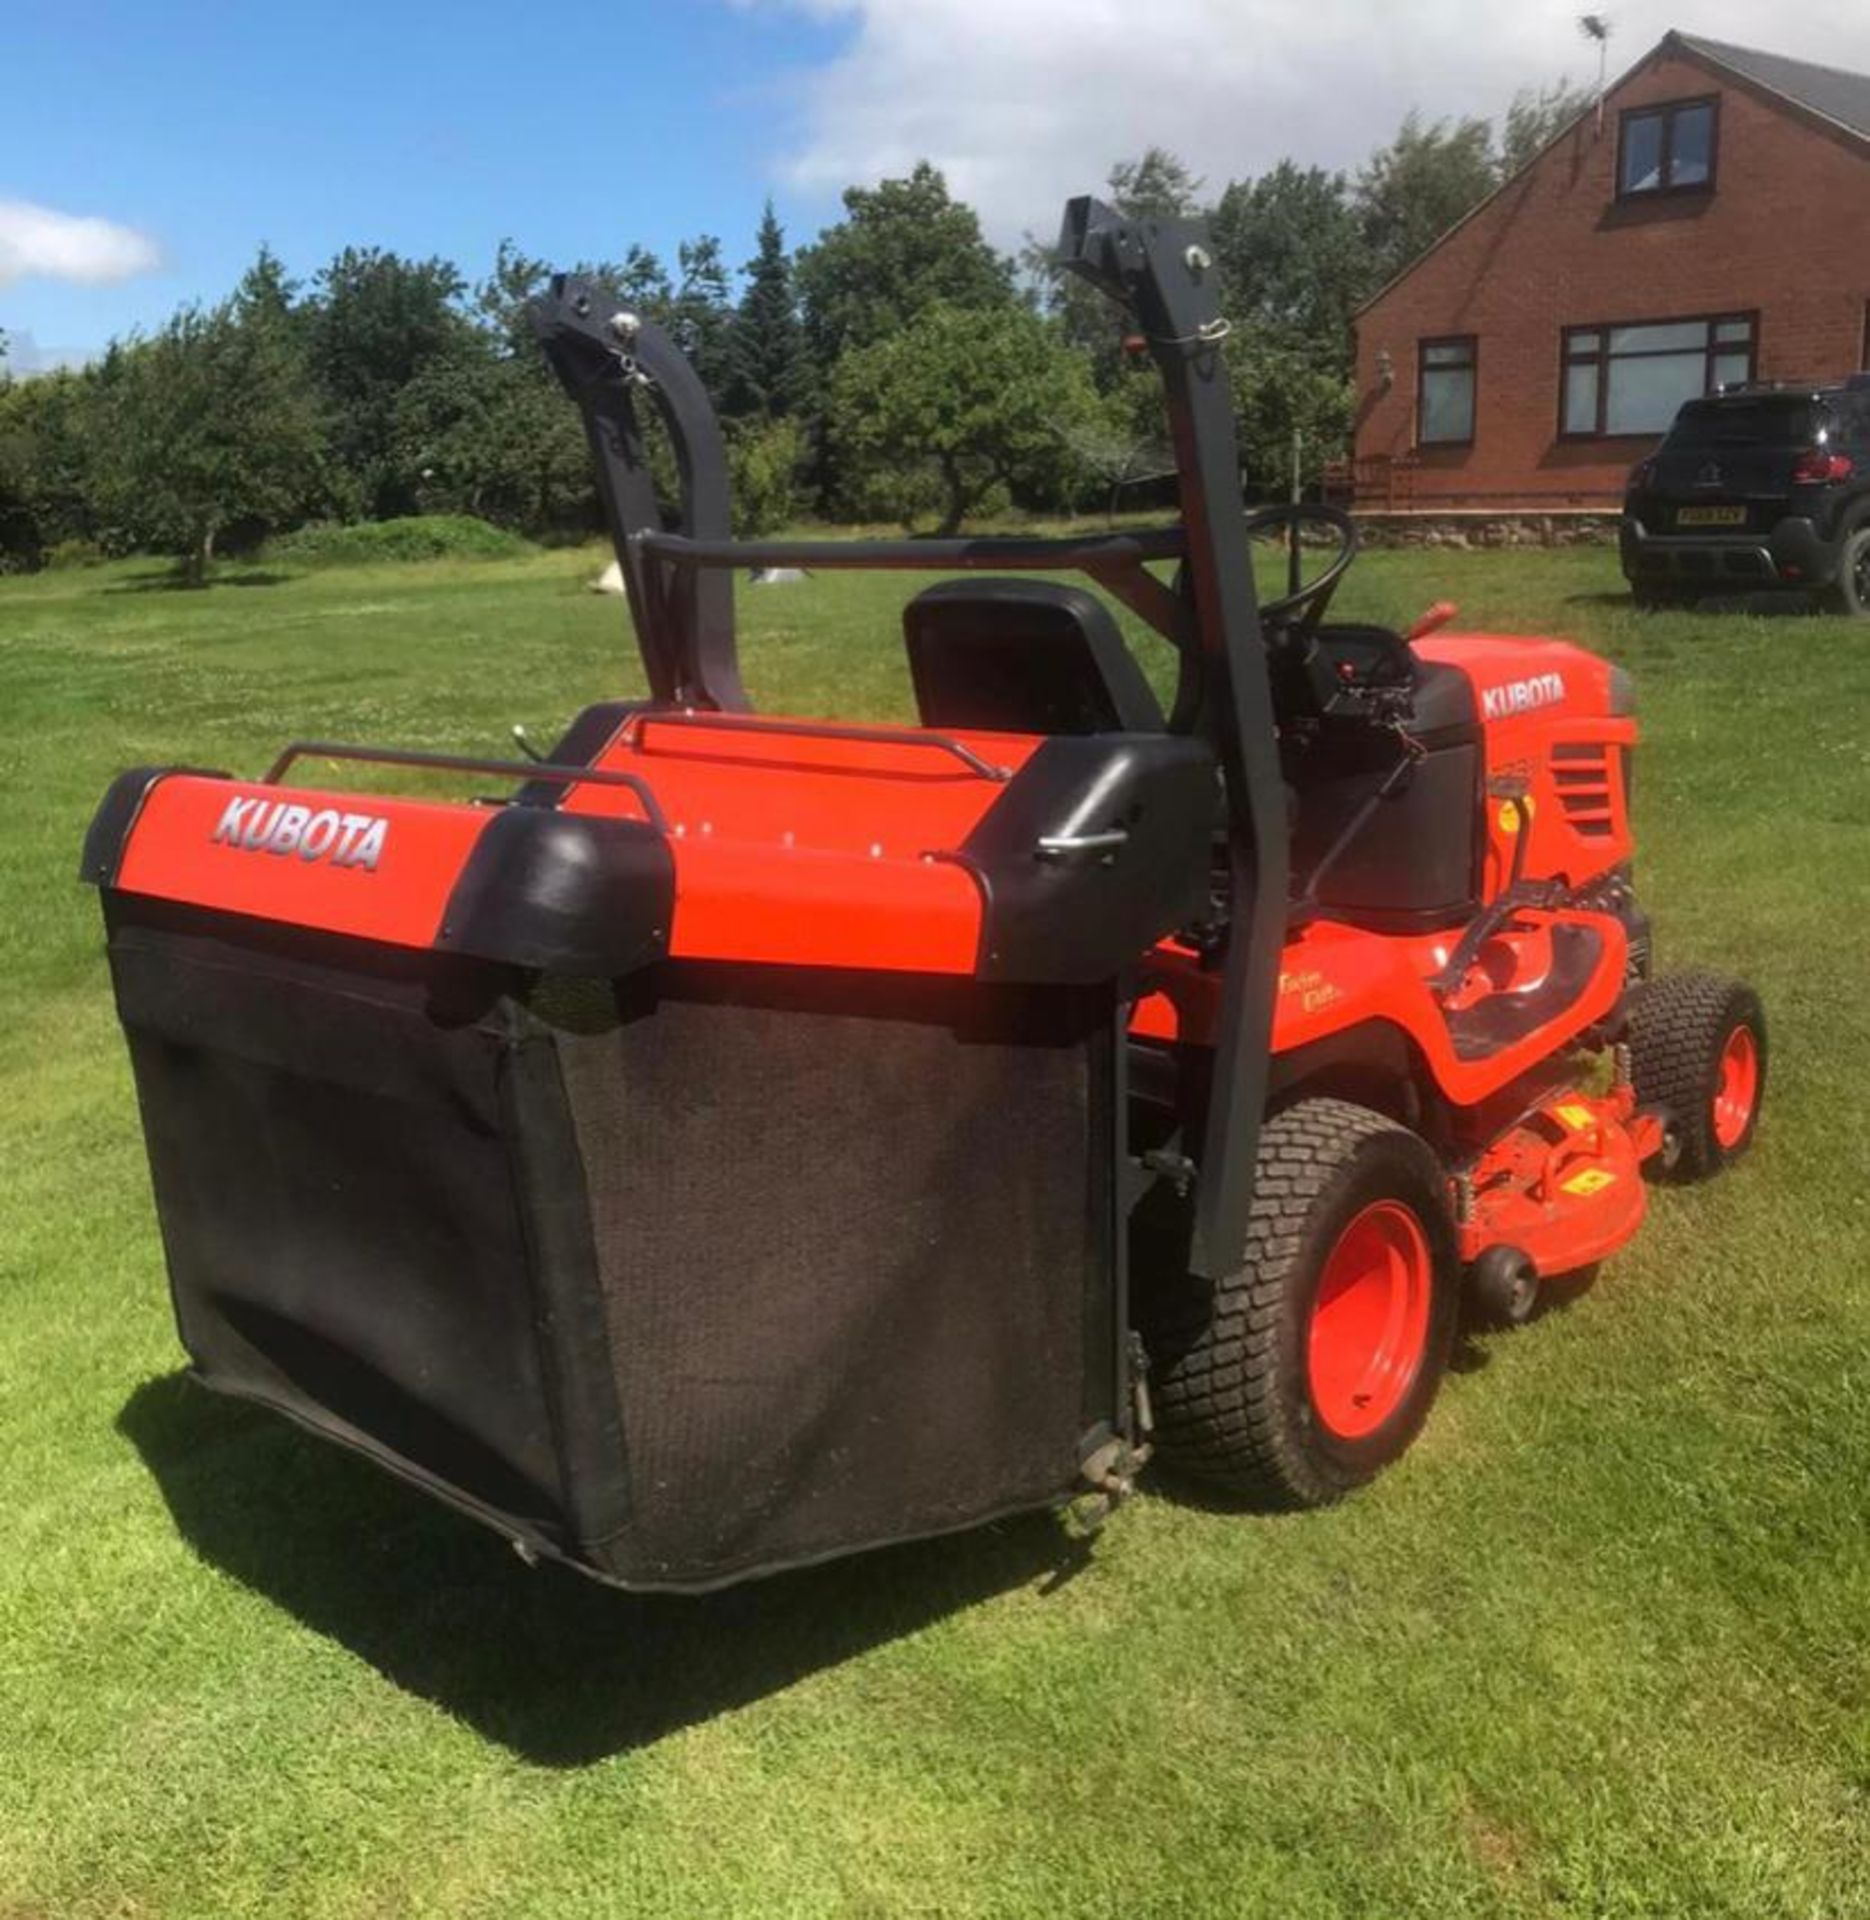 2015 KUBOTA G23-II RIDE ON MOWER, RUNS, DRIVES AND CUTS, EX DEMO CONDITION, LOW 200 HOURS *PLUS VAT* - Image 3 of 5